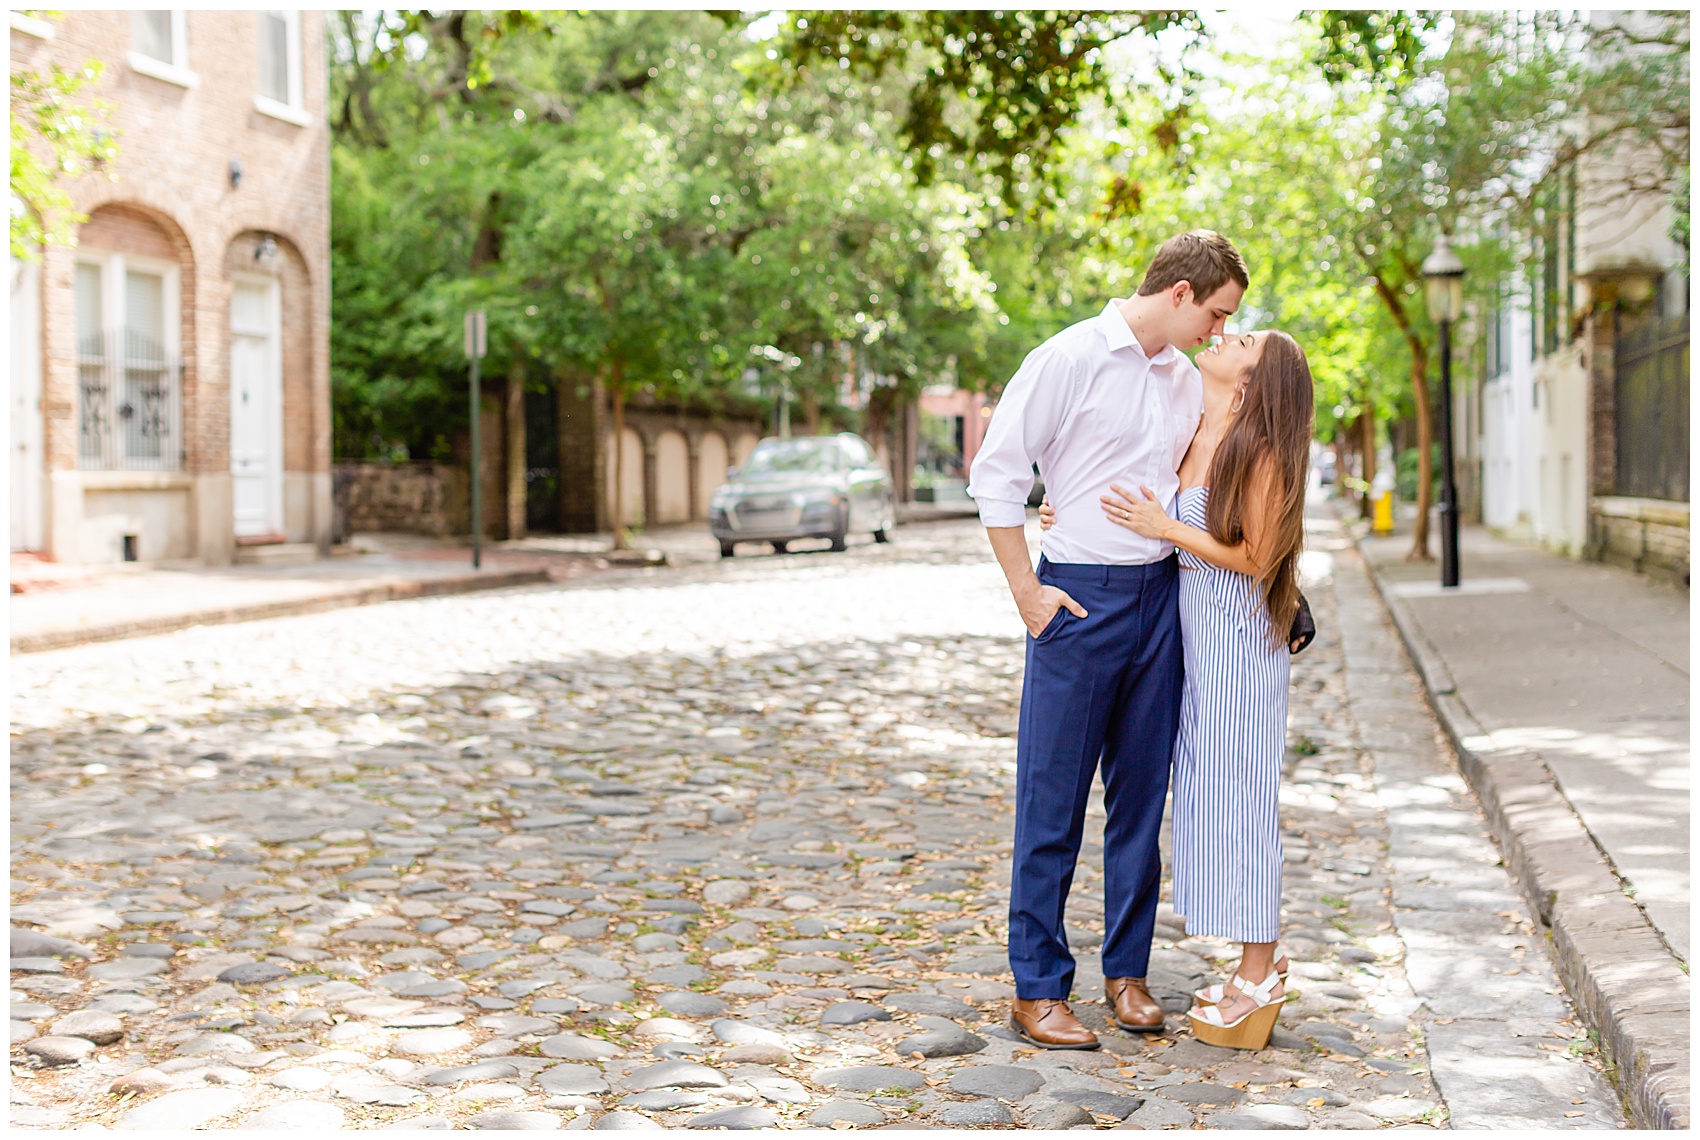 Chalmers Street - Best Engagement Locations in Charleston